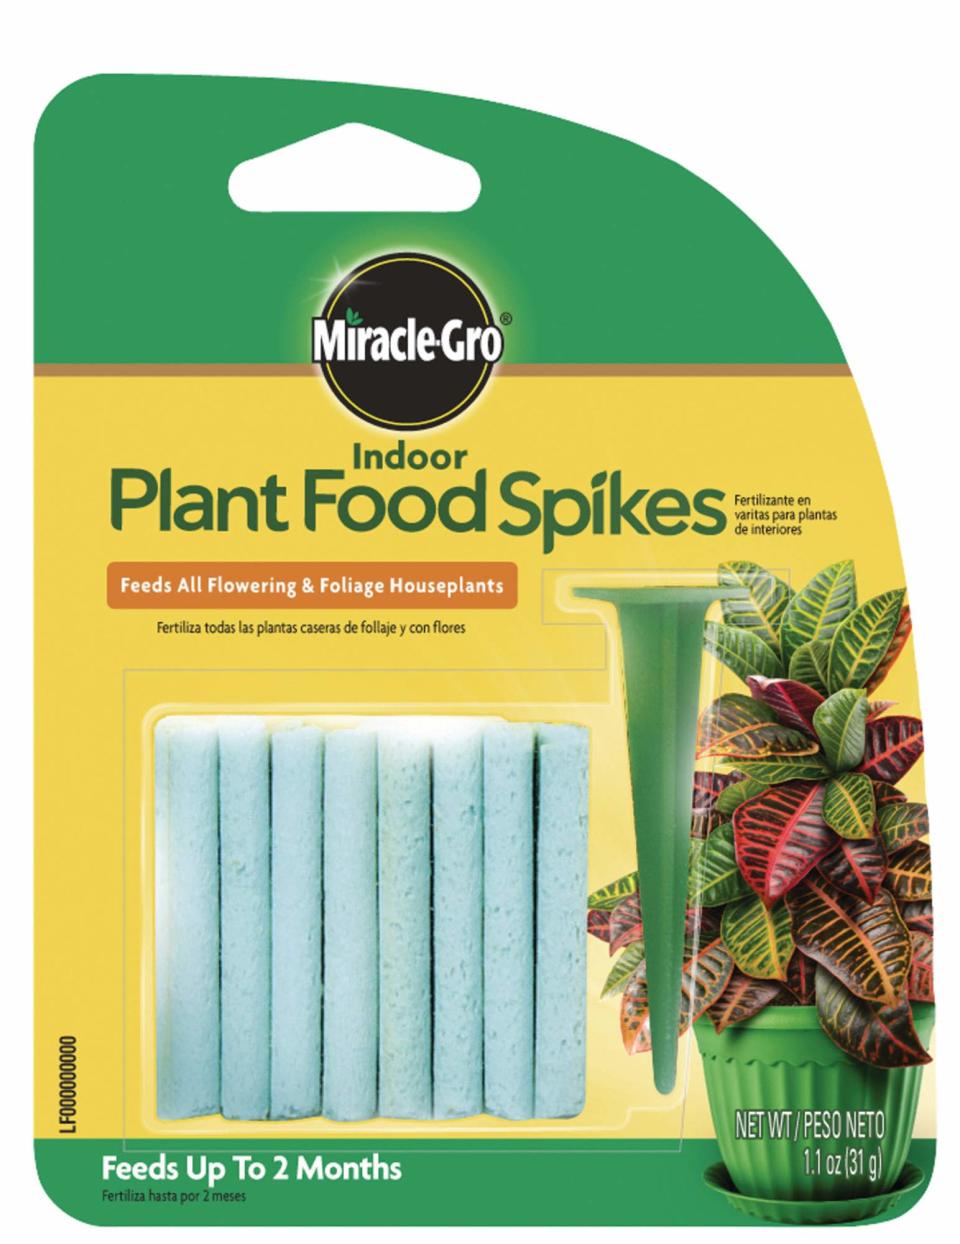 <h3><a href="https://amzn.to/3b3wF31" rel="nofollow noopener" target="_blank" data-ylk="slk:Indoor Plant Food Spikes" class="link rapid-noclick-resp">Indoor Plant Food Spikes</a></h3><br><strong>Keny</strong><br><br><strong>How She Discovered It: </strong>"I first tried these after planting some basil and other herbs that seemed to be taking an eternity to grow."<br><br><strong>Why It's A Hidden Gem: </strong>"Within just a few days, my plants had doubled in size!"<br><br><strong>Miracle-Gro</strong> Indoor Plant Food Spikes (2-Pack), $, available at <a href="https://amzn.to/3vBE9lv" rel="nofollow noopener" target="_blank" data-ylk="slk:Amazon" class="link rapid-noclick-resp">Amazon</a>